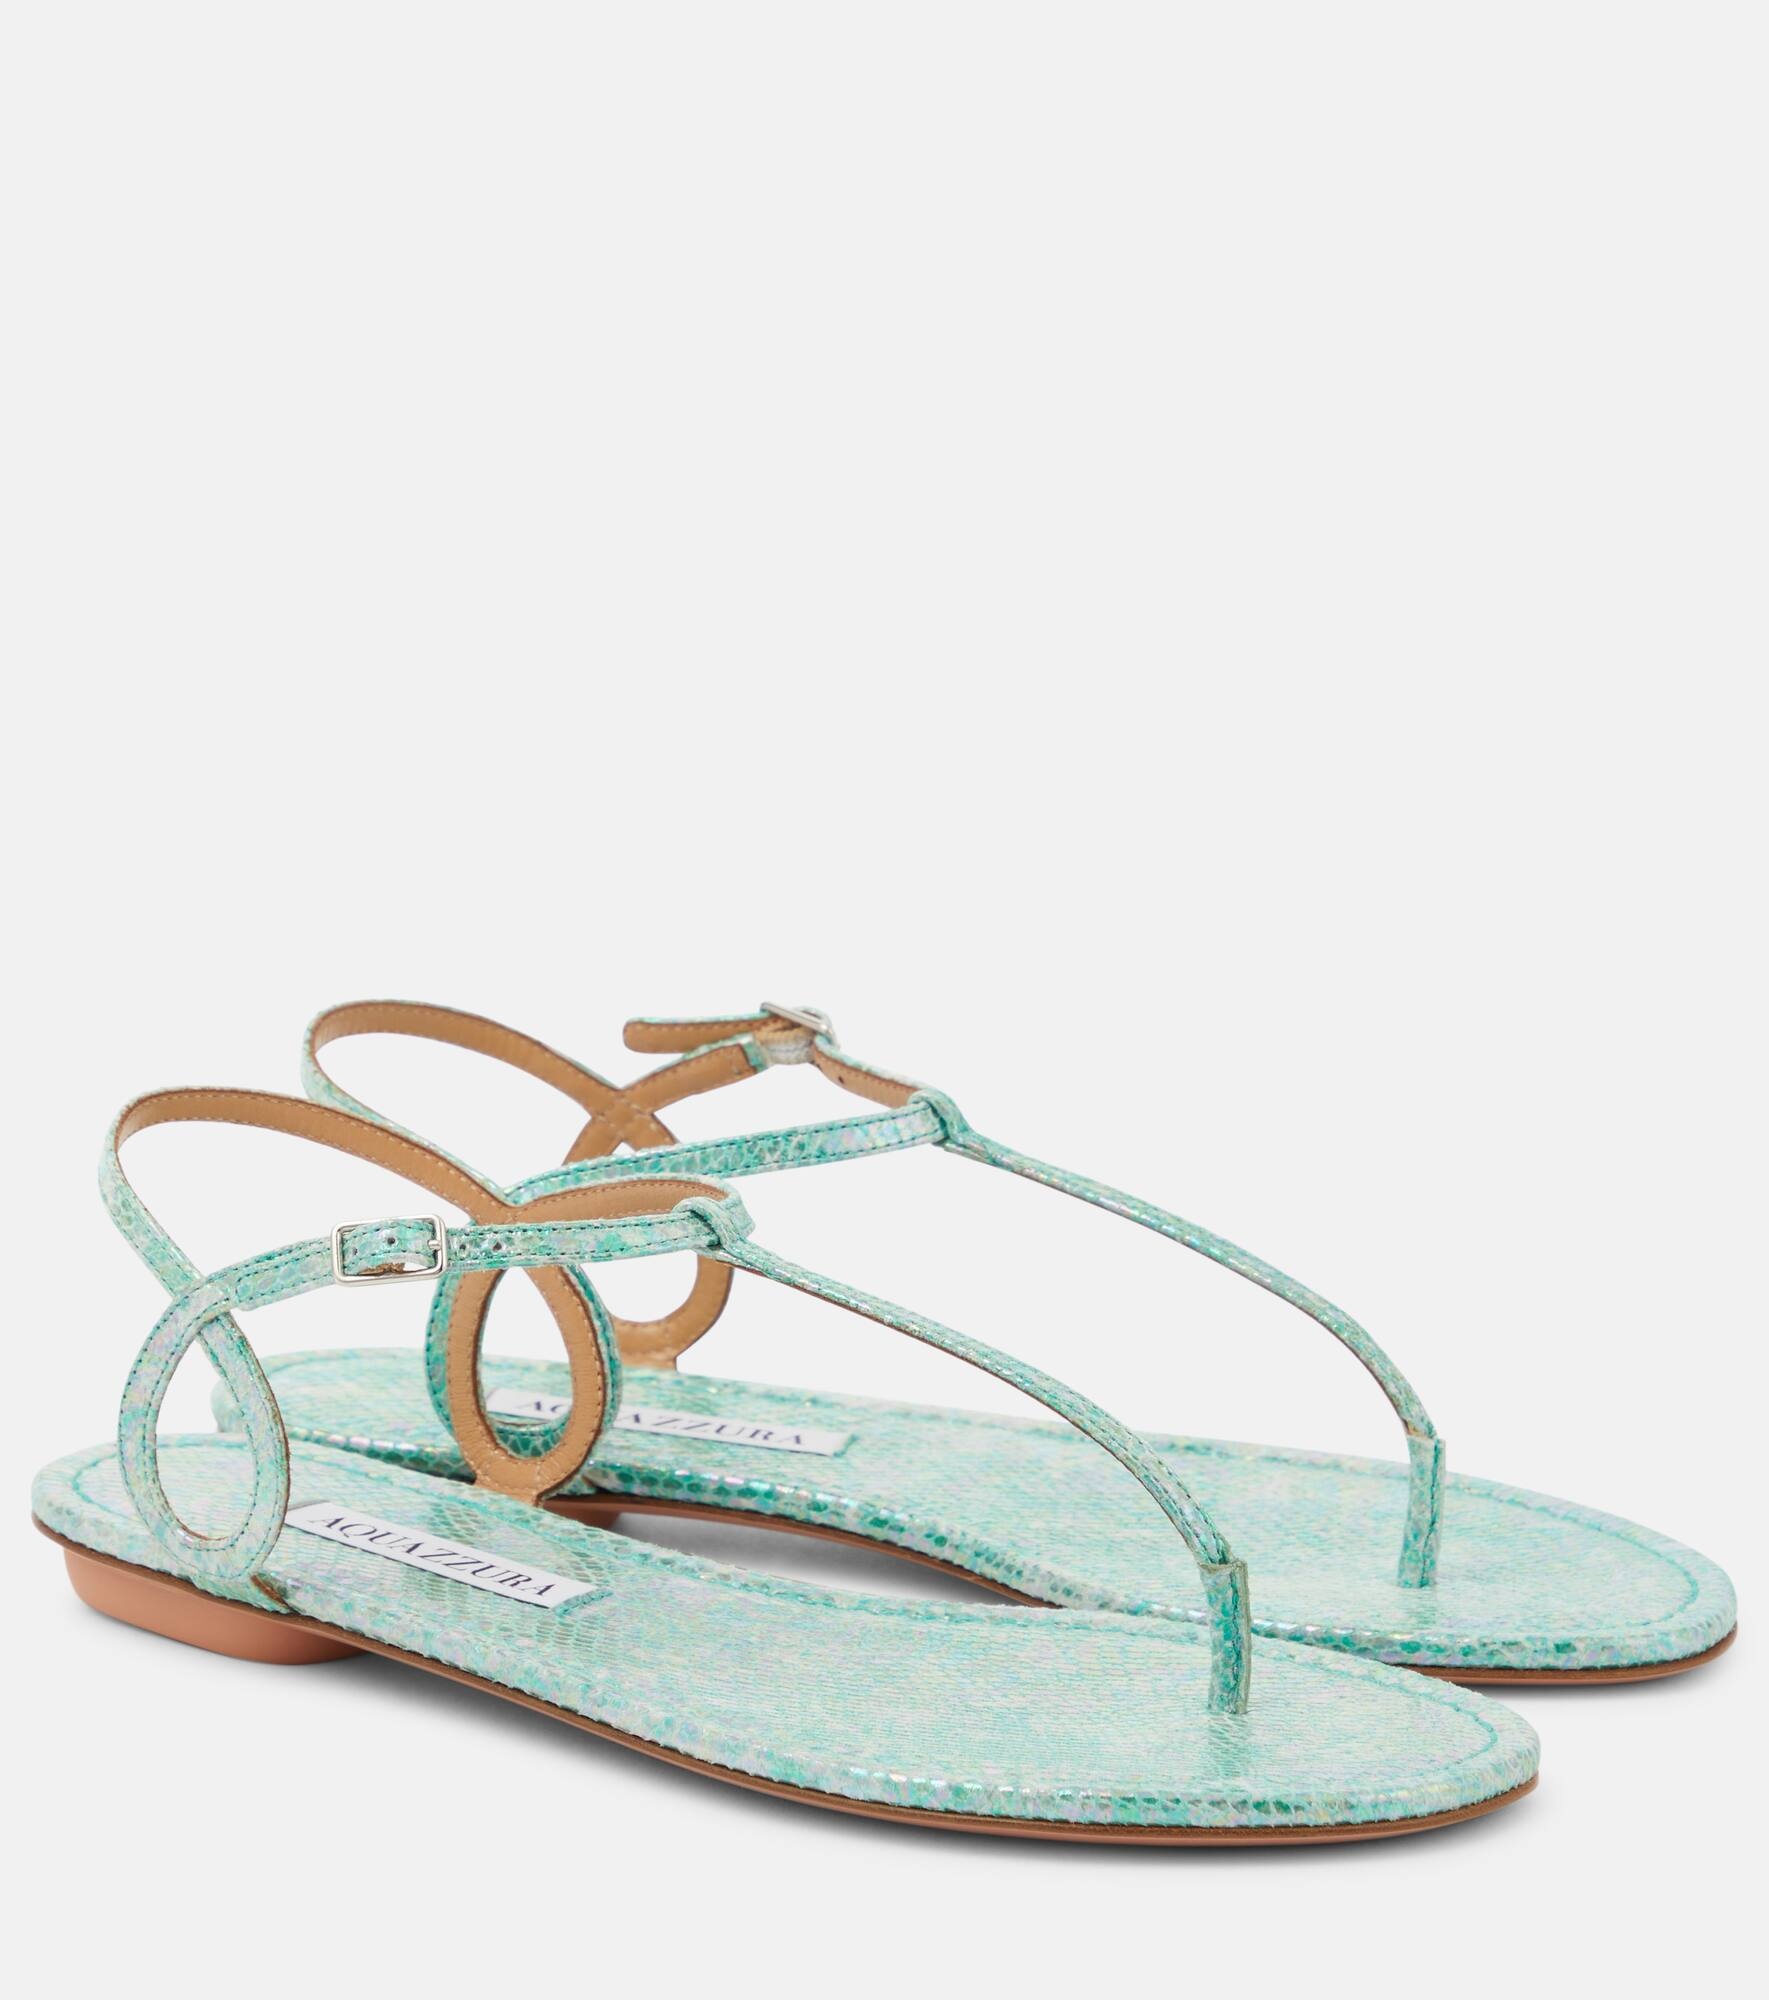 Almost Bare leather thong sandals - 1